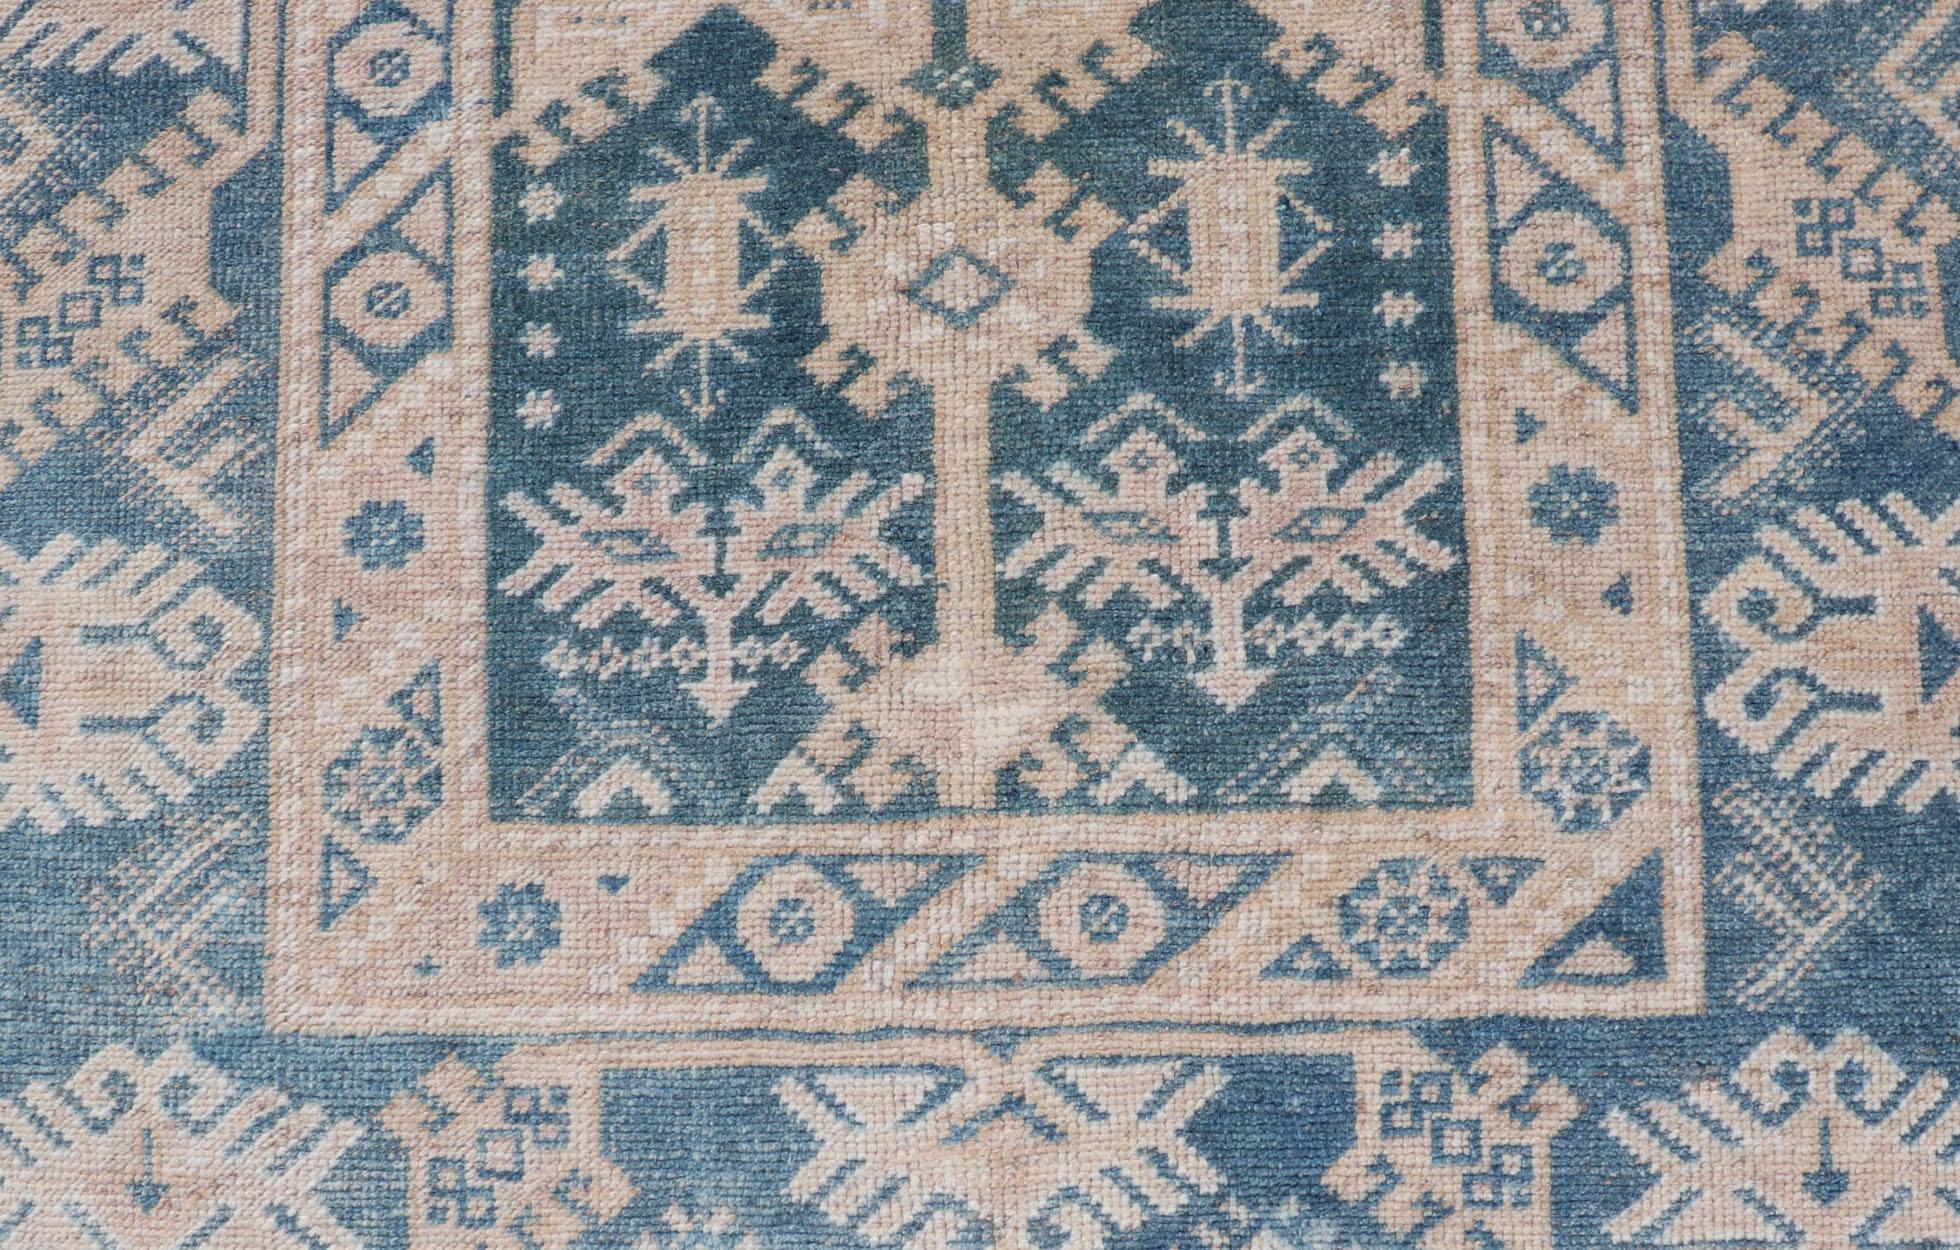 Measures: 3'11 x 6'3 
Blue and Cream Turkish Oushak Rug Vintage with All-Over Motif Design. Keivan Woven Arts / rug EN-14550, country of origin / type: Turkey / Oushak, circa 1940

This vintage Oushak features an all-over floral design. The blue